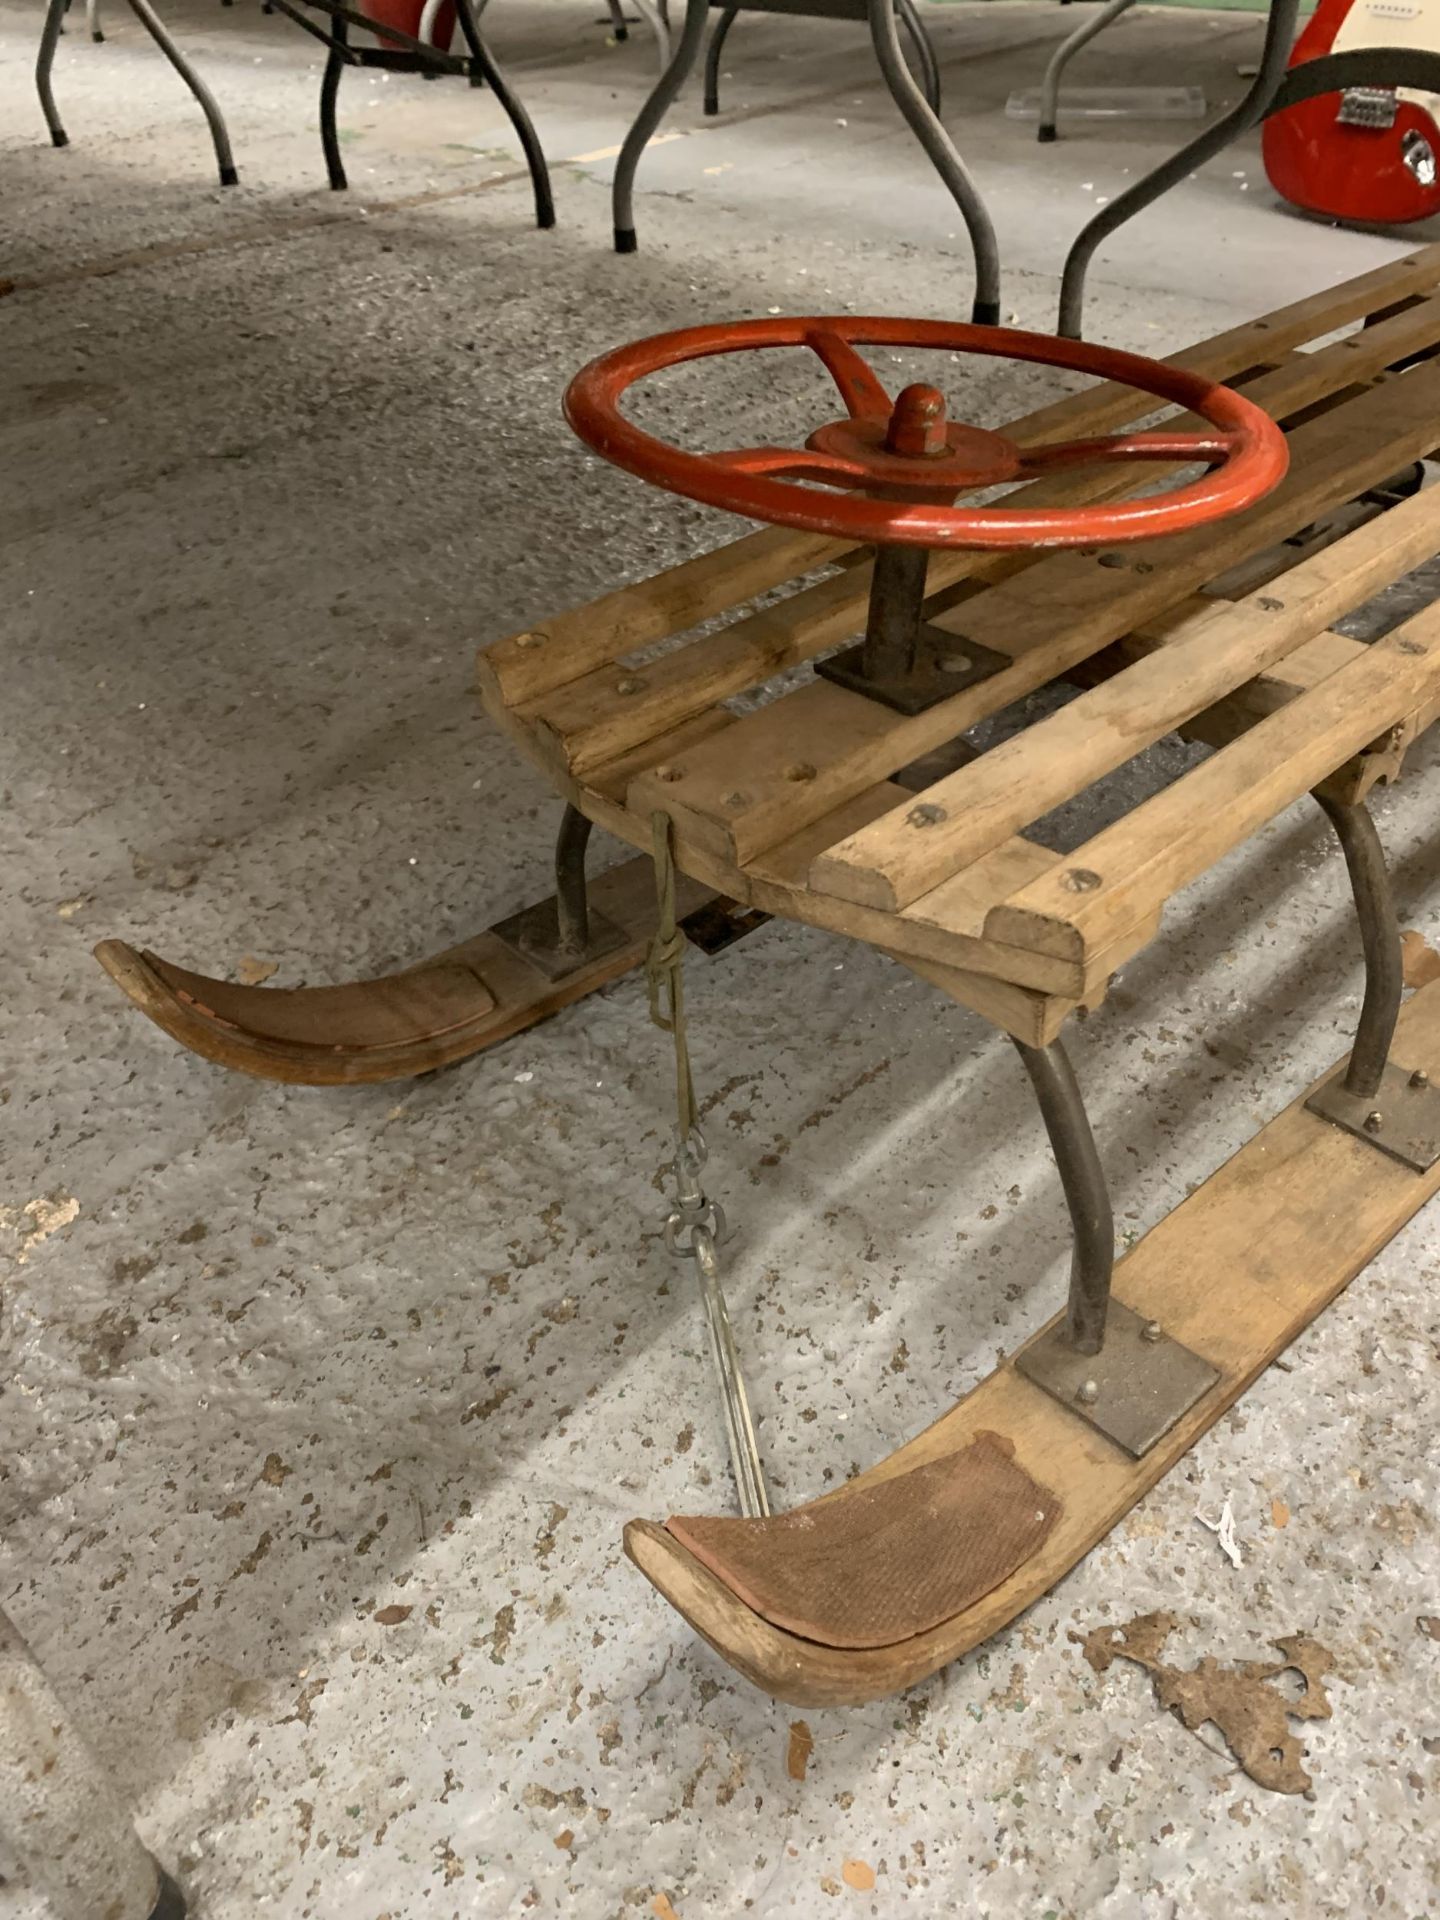 A VINTAGE WOODEN SLEDGE WITH A STEERING WHEEL - Image 2 of 4